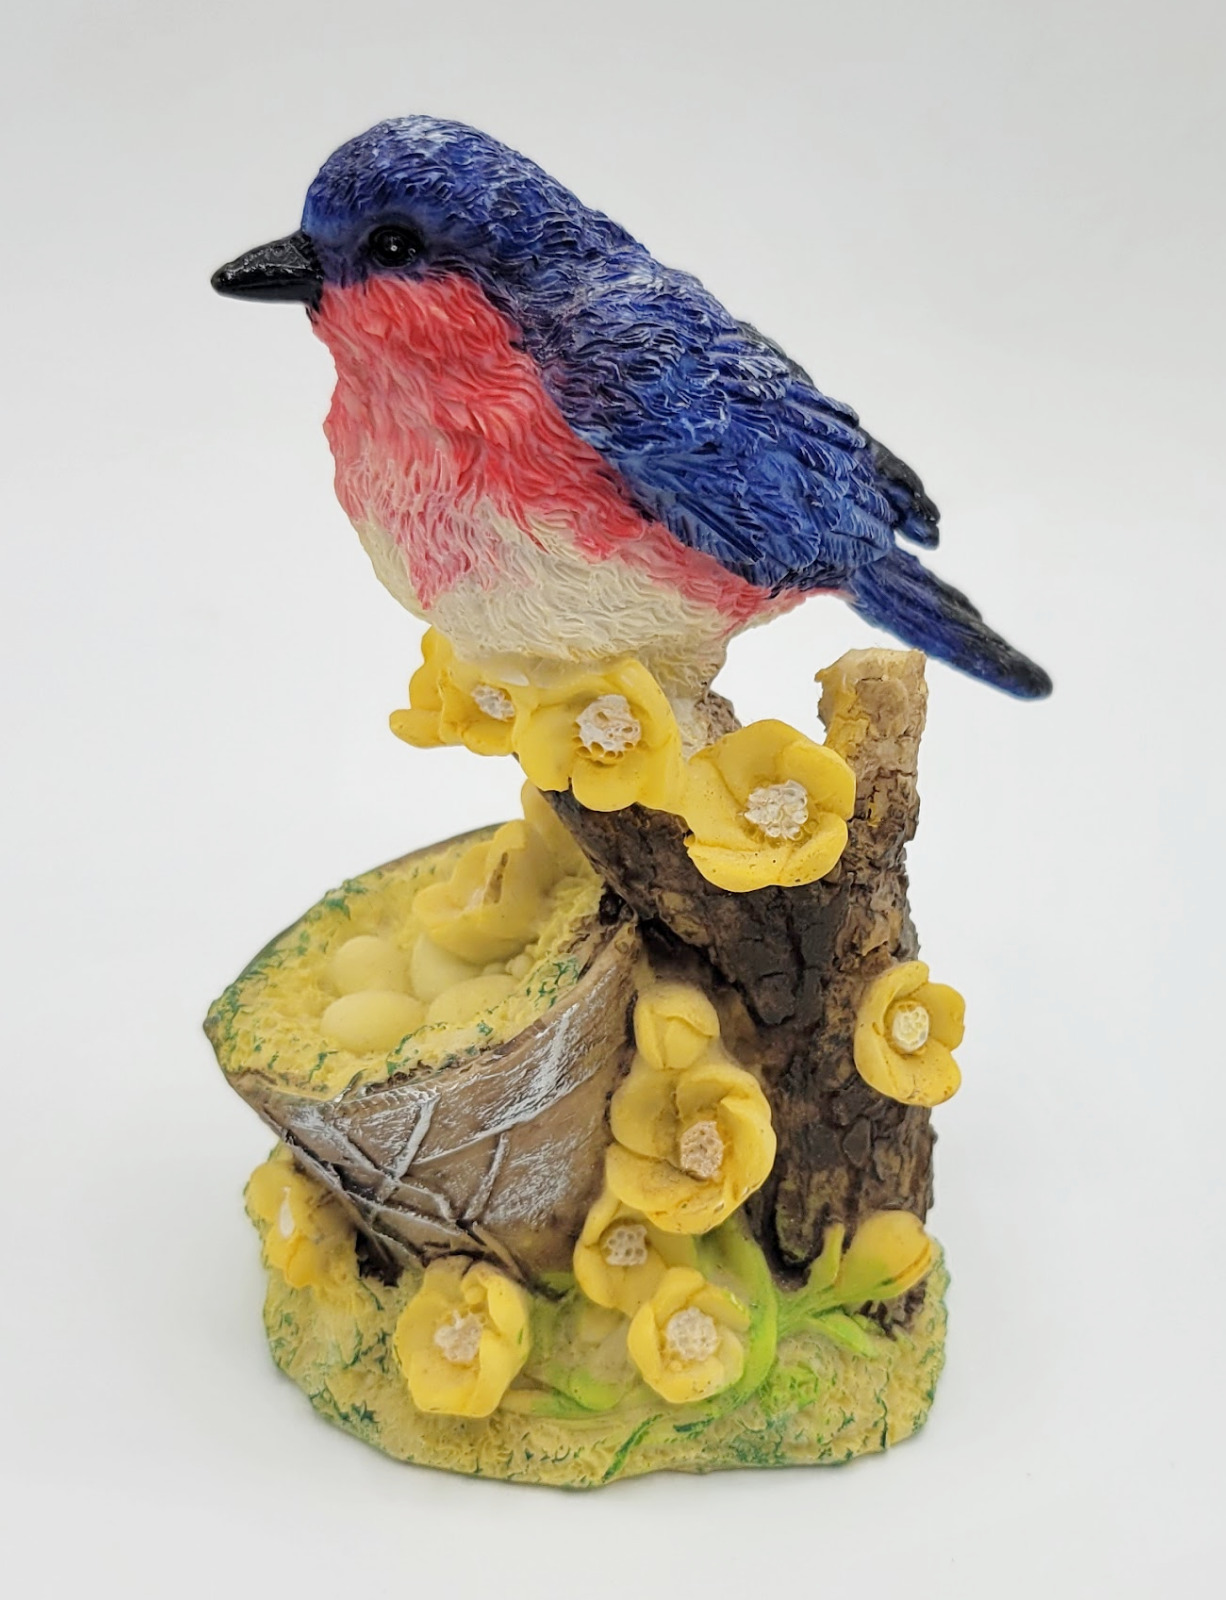 Vintage Resin Blue Bird on Branch Figurine With Yellow Flowers and Eggs Nest